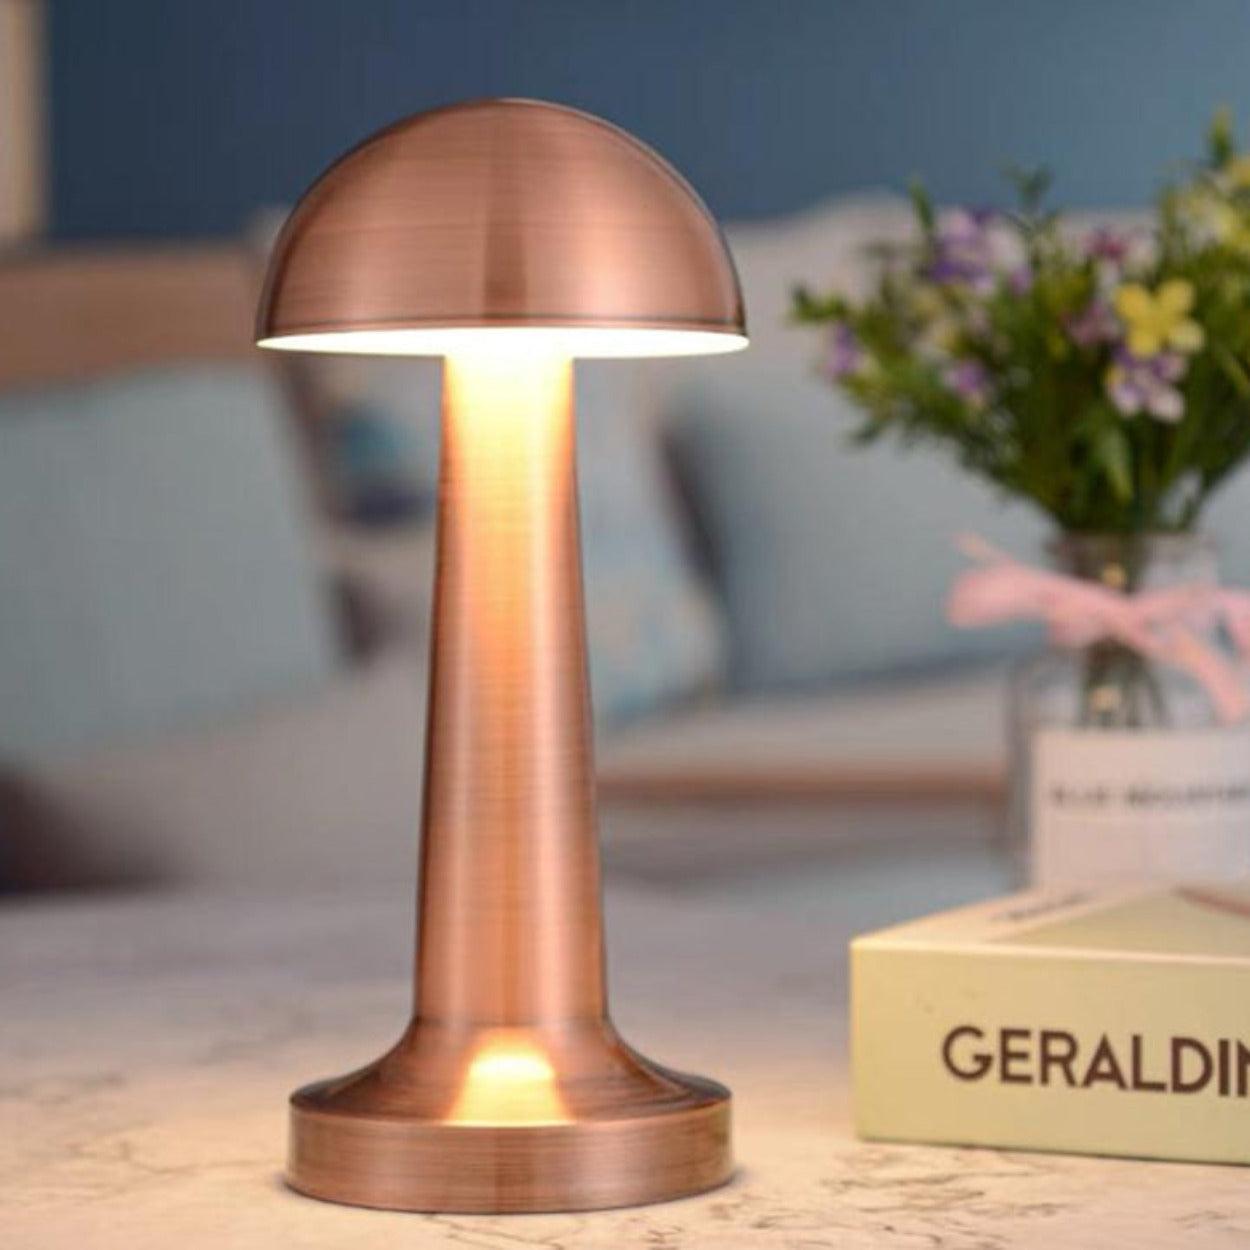 MUSHROOM RECHARGABLE TOUCH CONTROL WIRELESS BAR TABLE LAMP at the